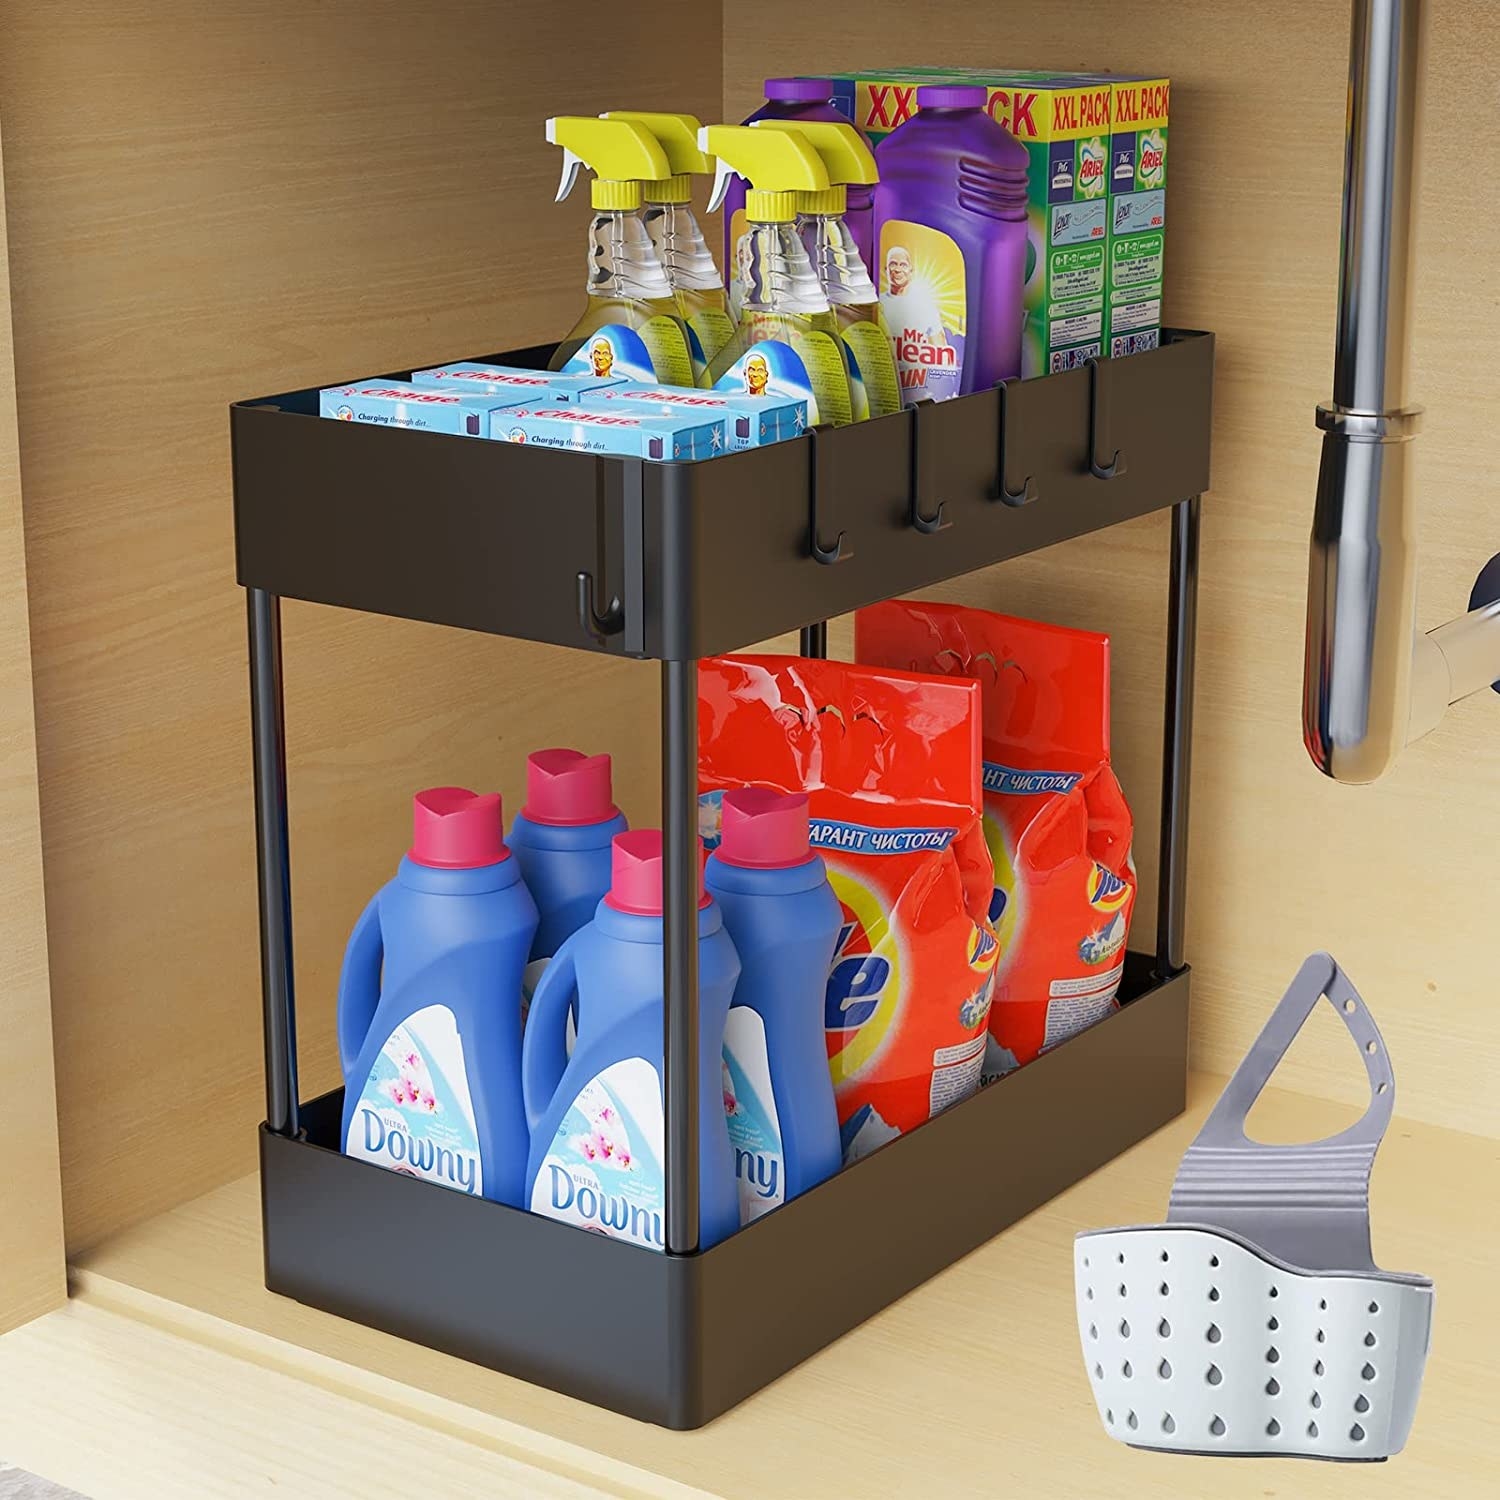 detergents and cleaners in the organizer